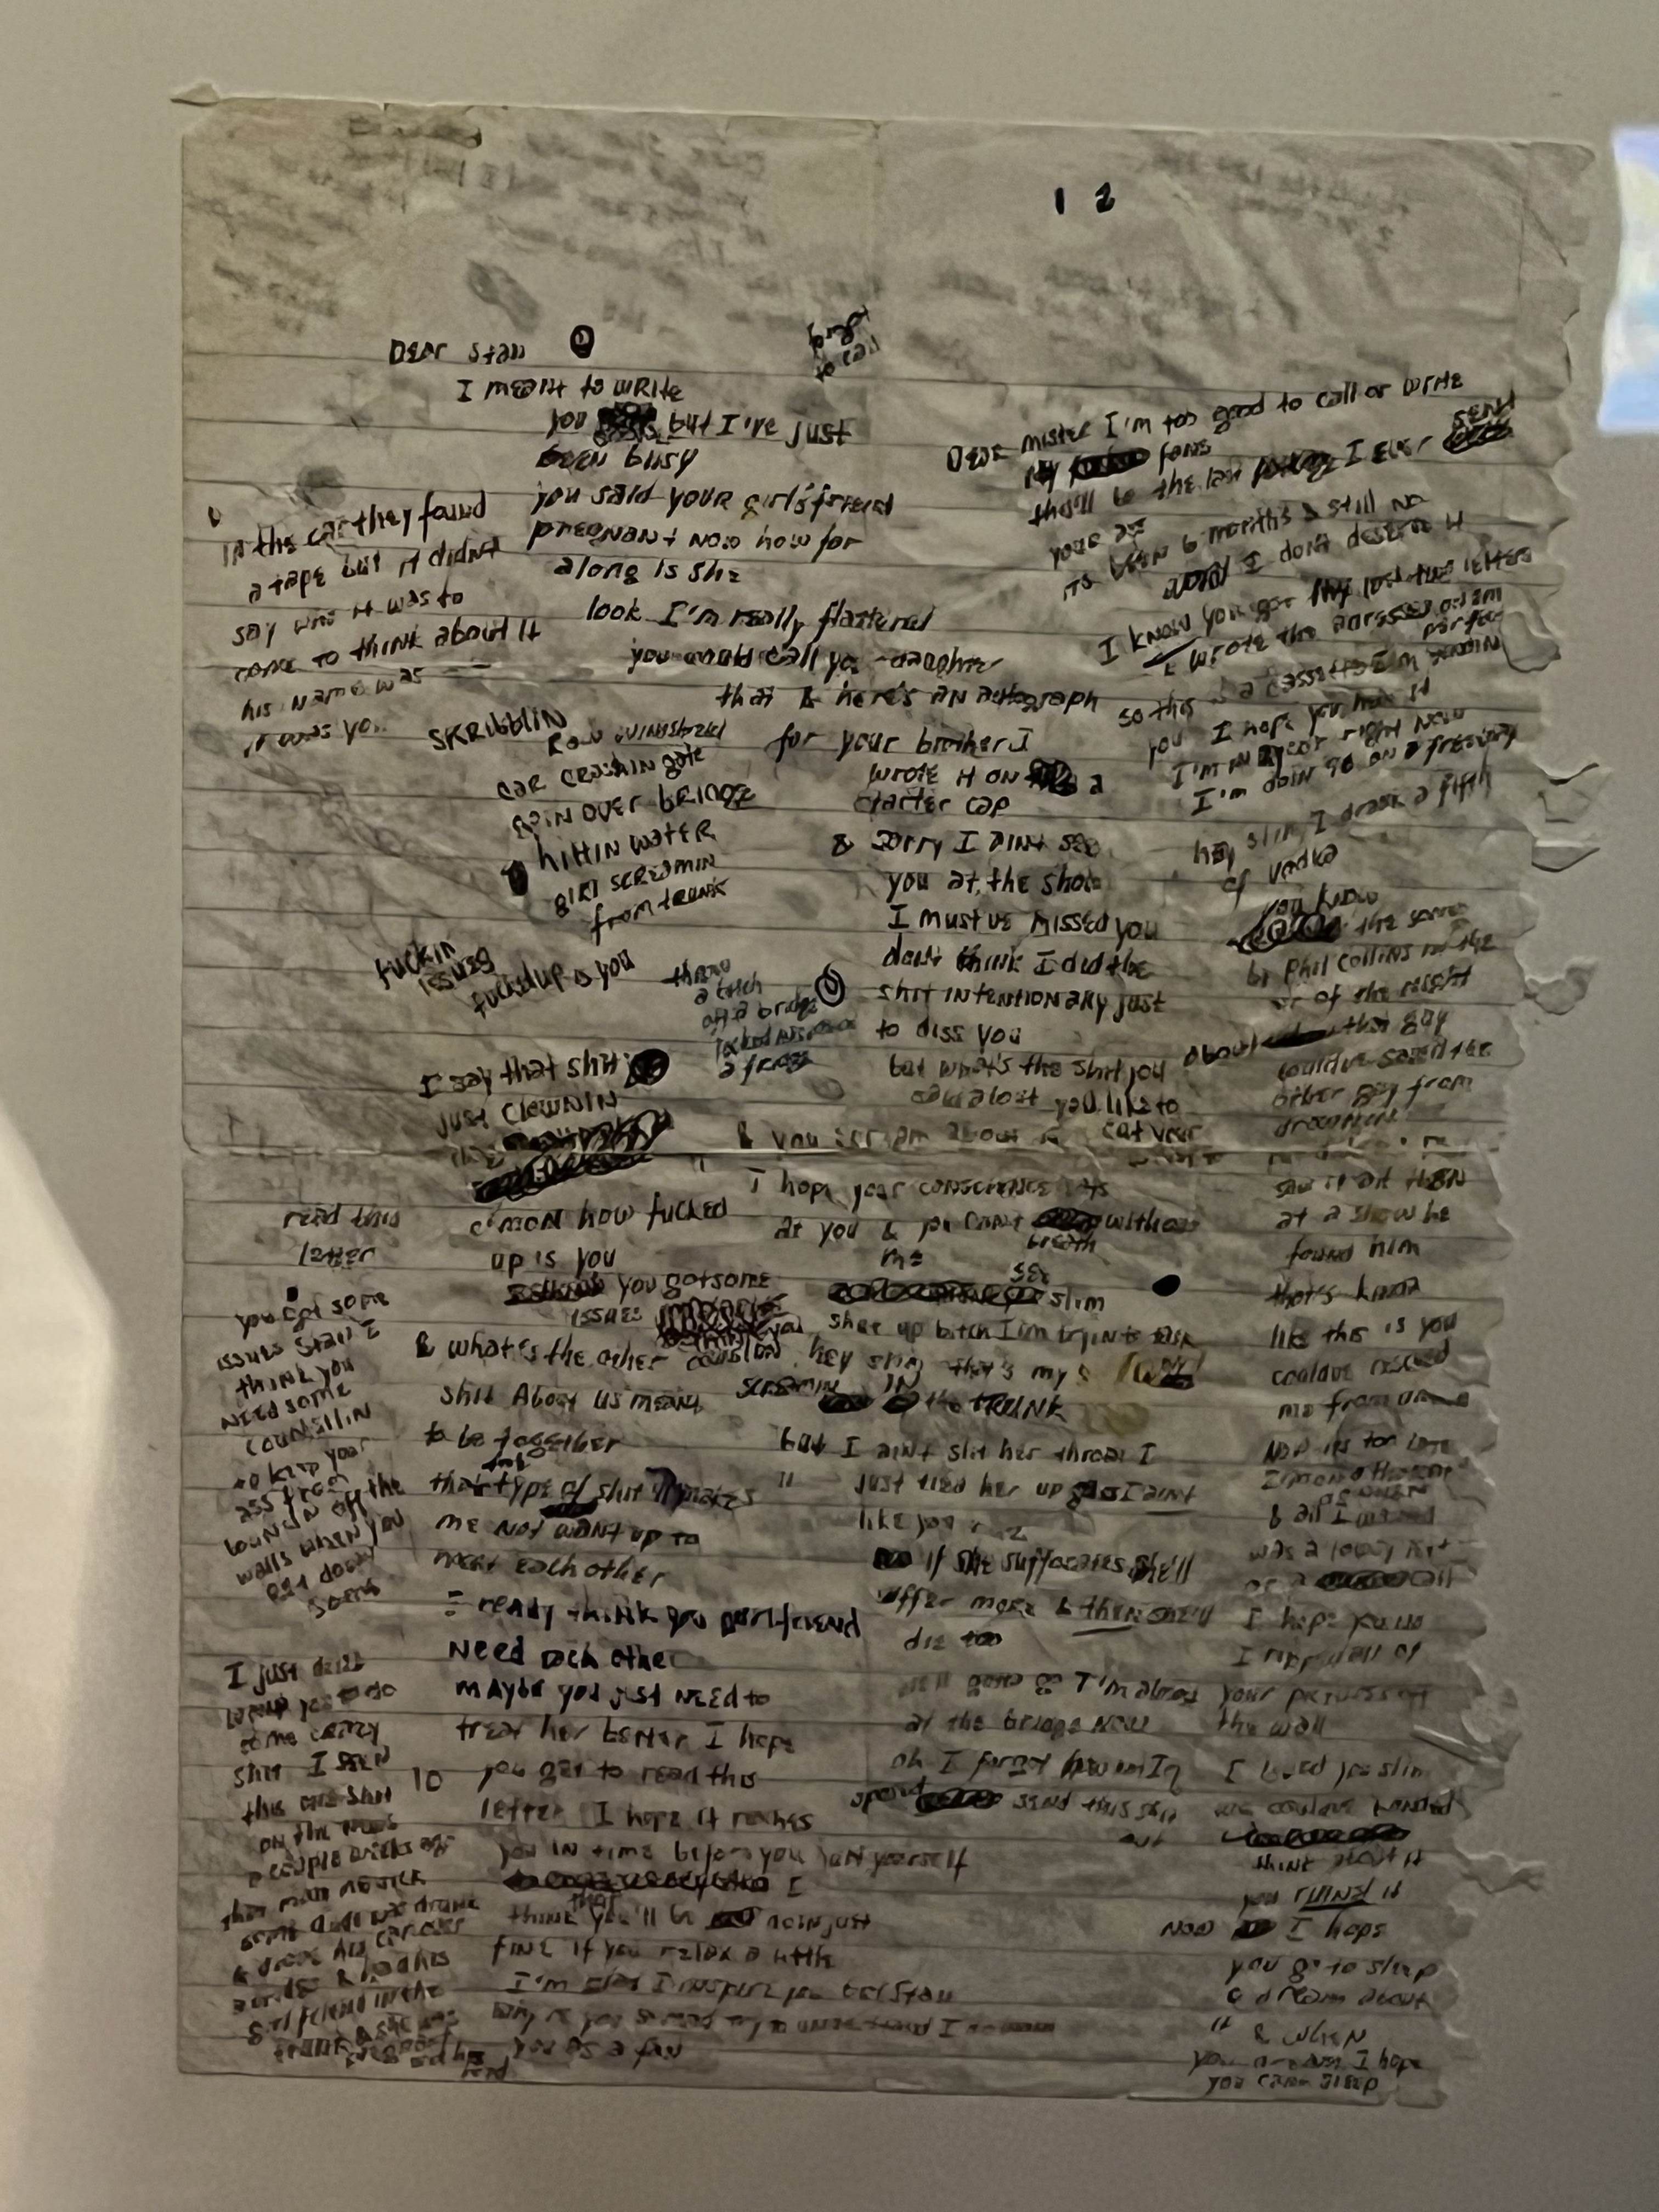 A piece of note paper with lyrics written in ink.